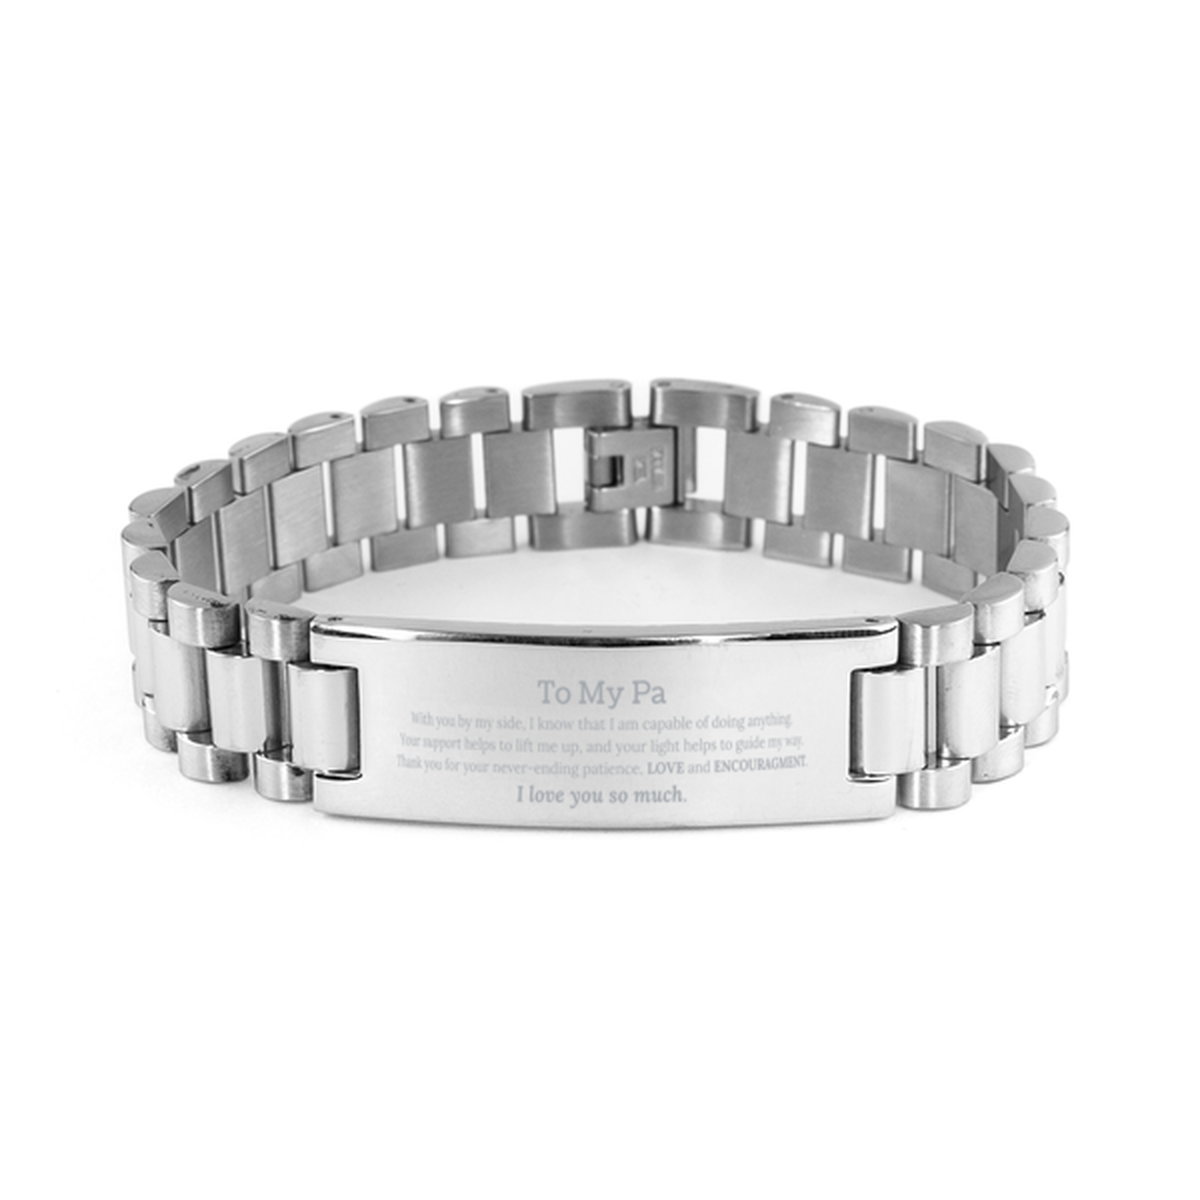 Appreciation Pa Ladder Stainless Steel Bracelet Gifts, To My Pa Birthday Christmas Wedding Keepsake Gifts for Pa With you by my side, I know that I am capable of doing anything. I love you so much